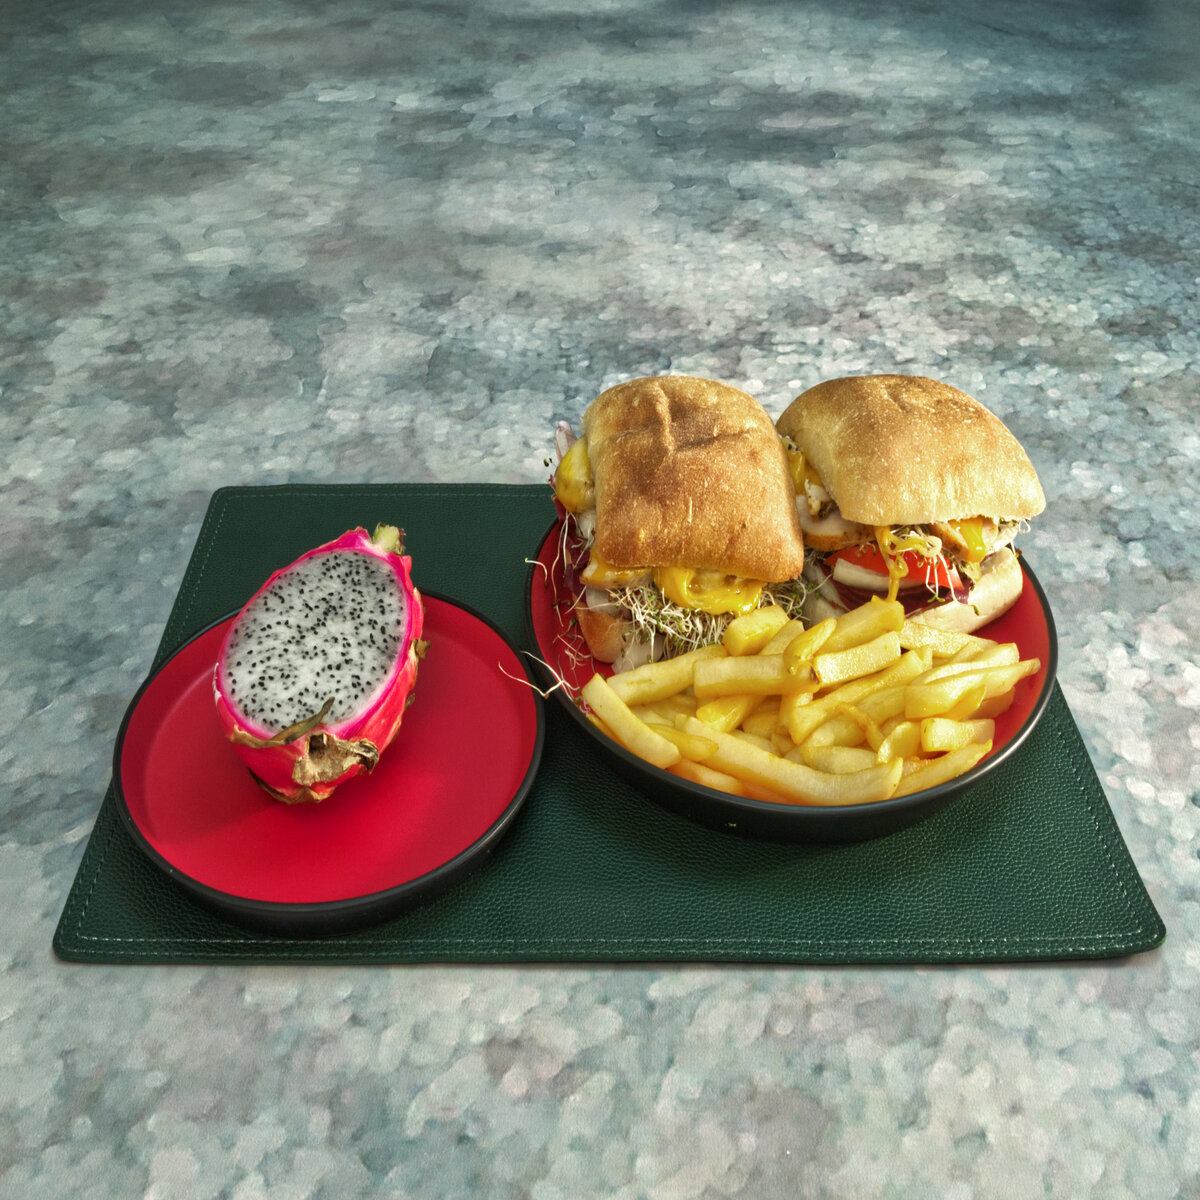 Hot Turkey and Cheese Sandwiches with Fries and Dragon Fruit